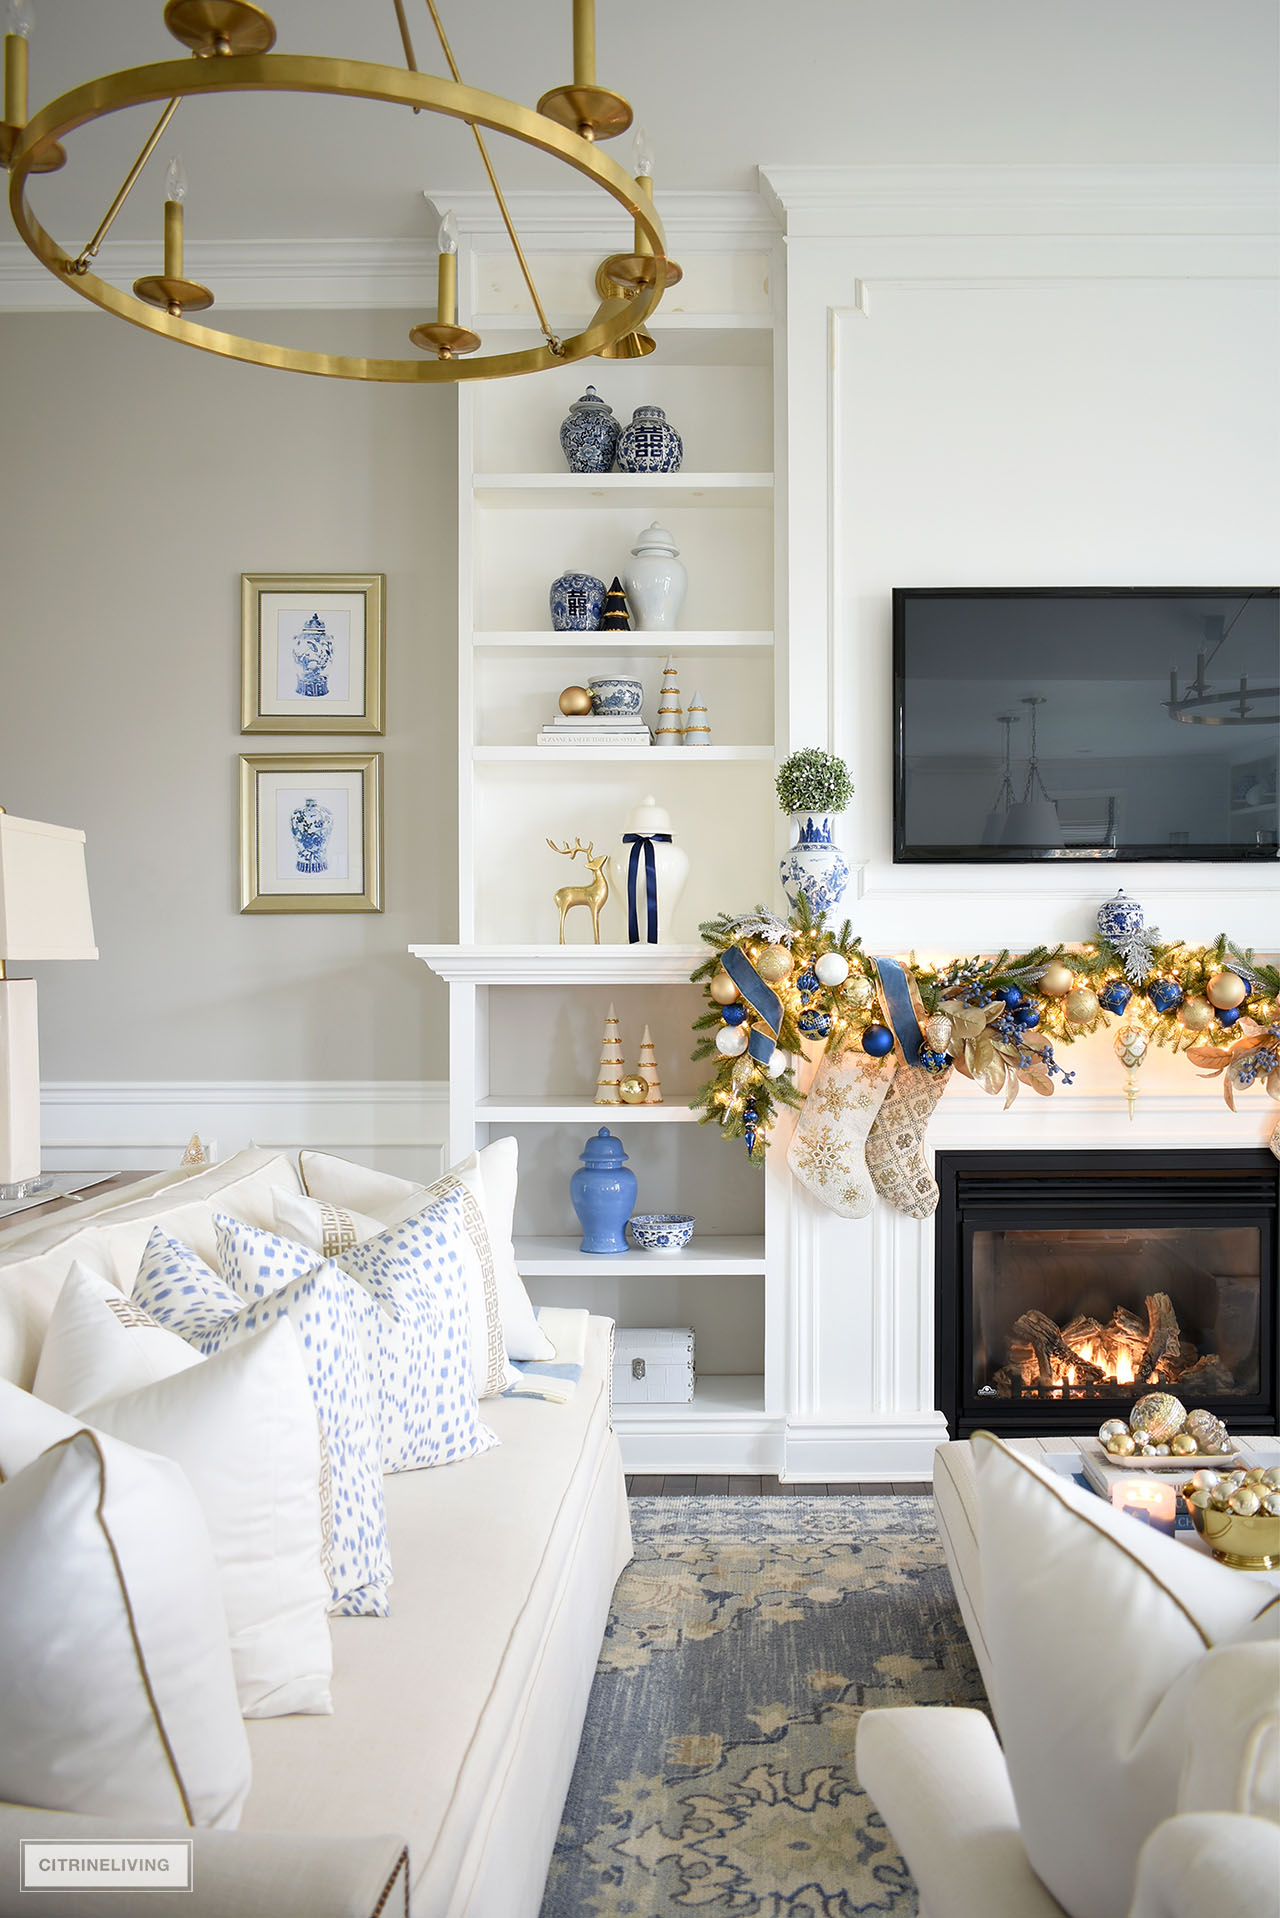 Living room with builtin bookshelves, decorated for Christmas with blue and gold and white accessories.